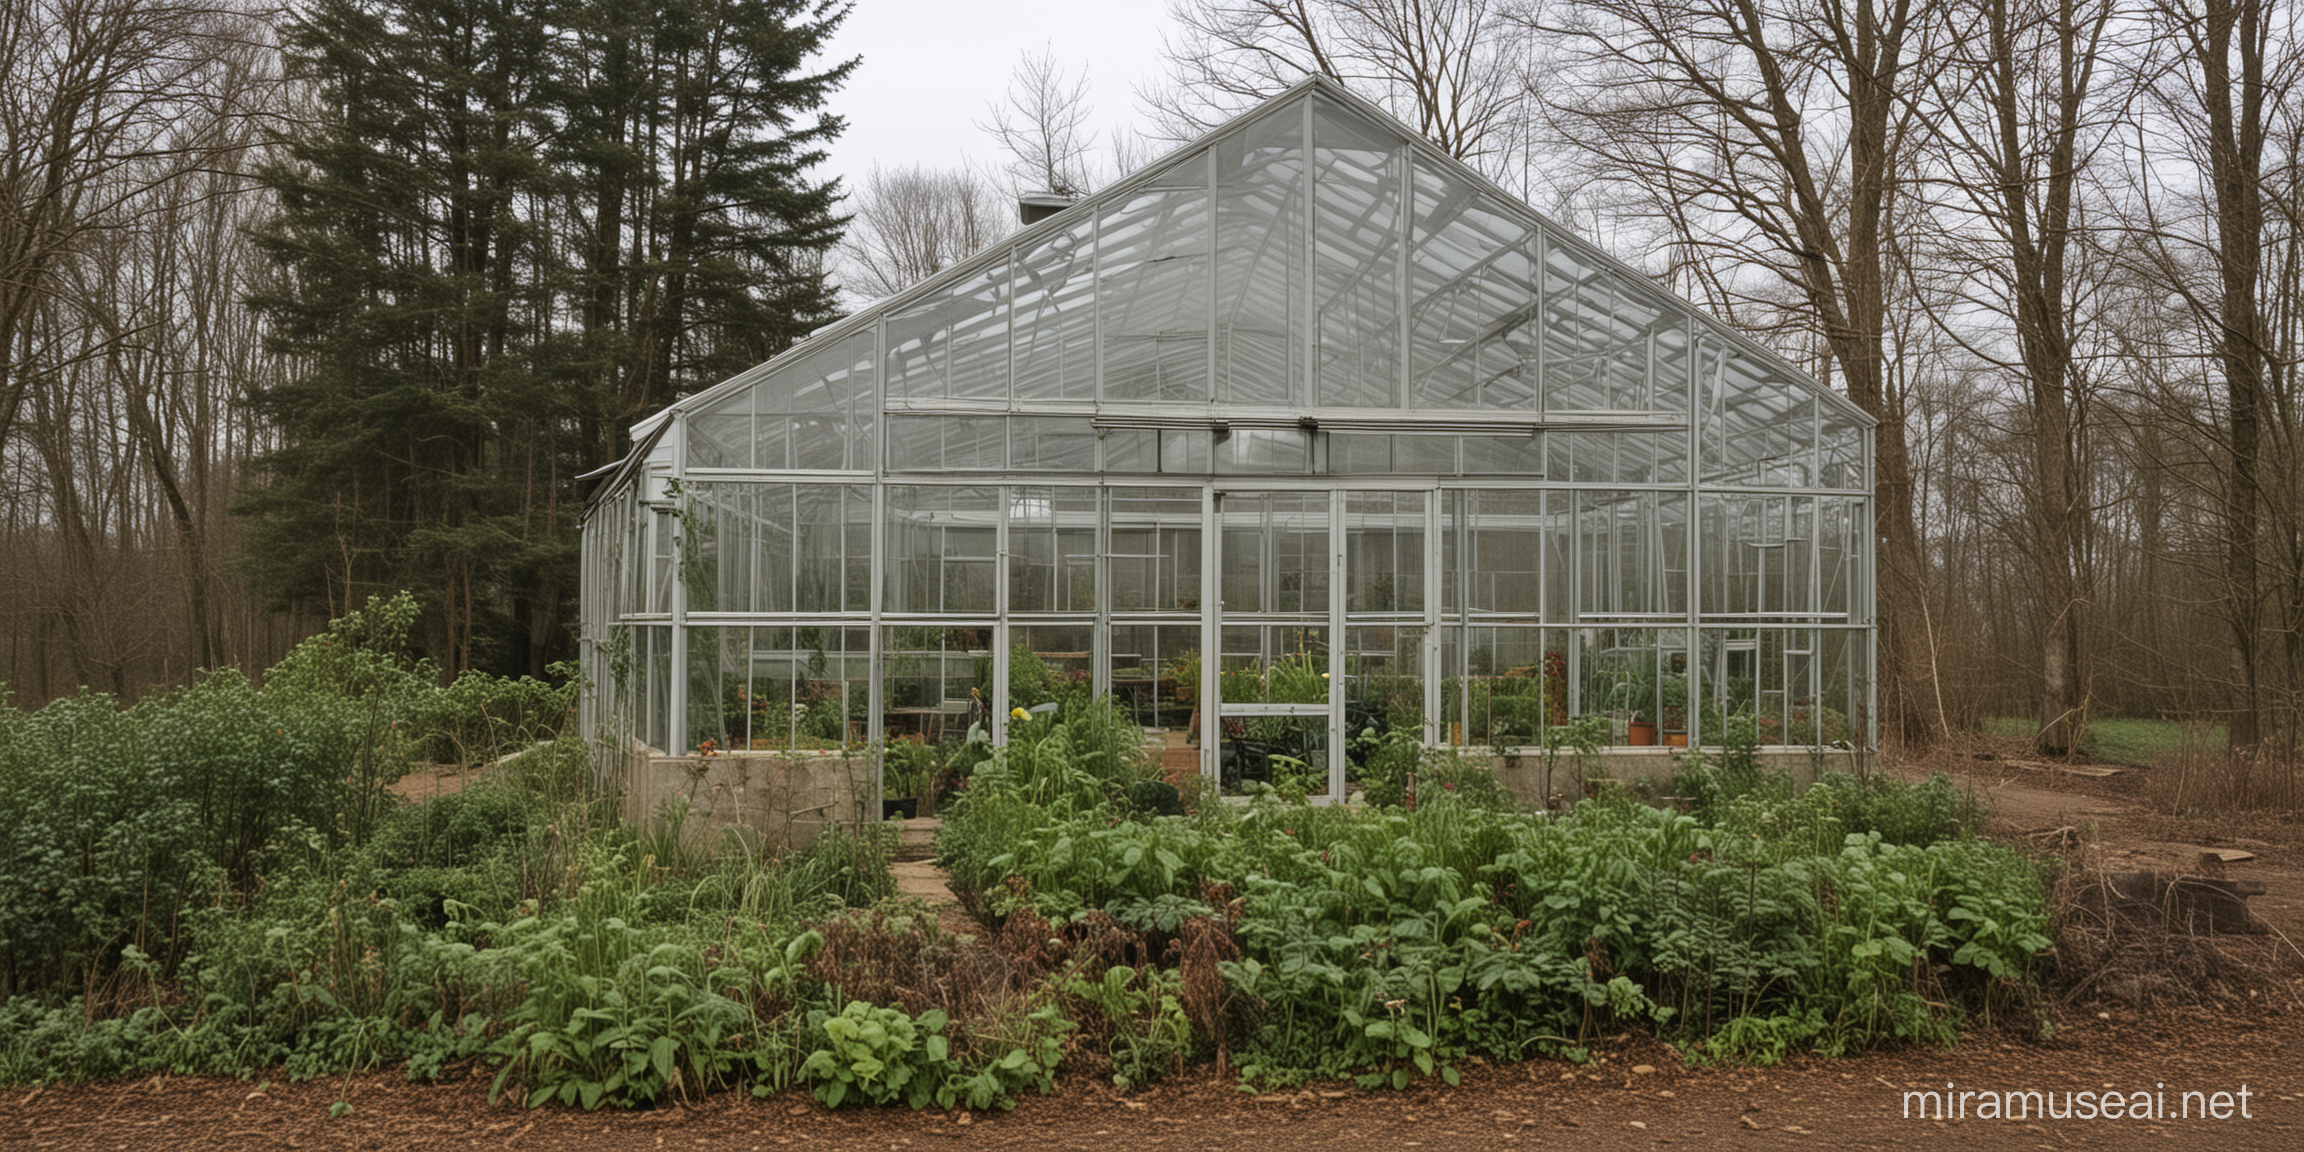 Exterior View of a Greenhouse with Vibrant Plant Life